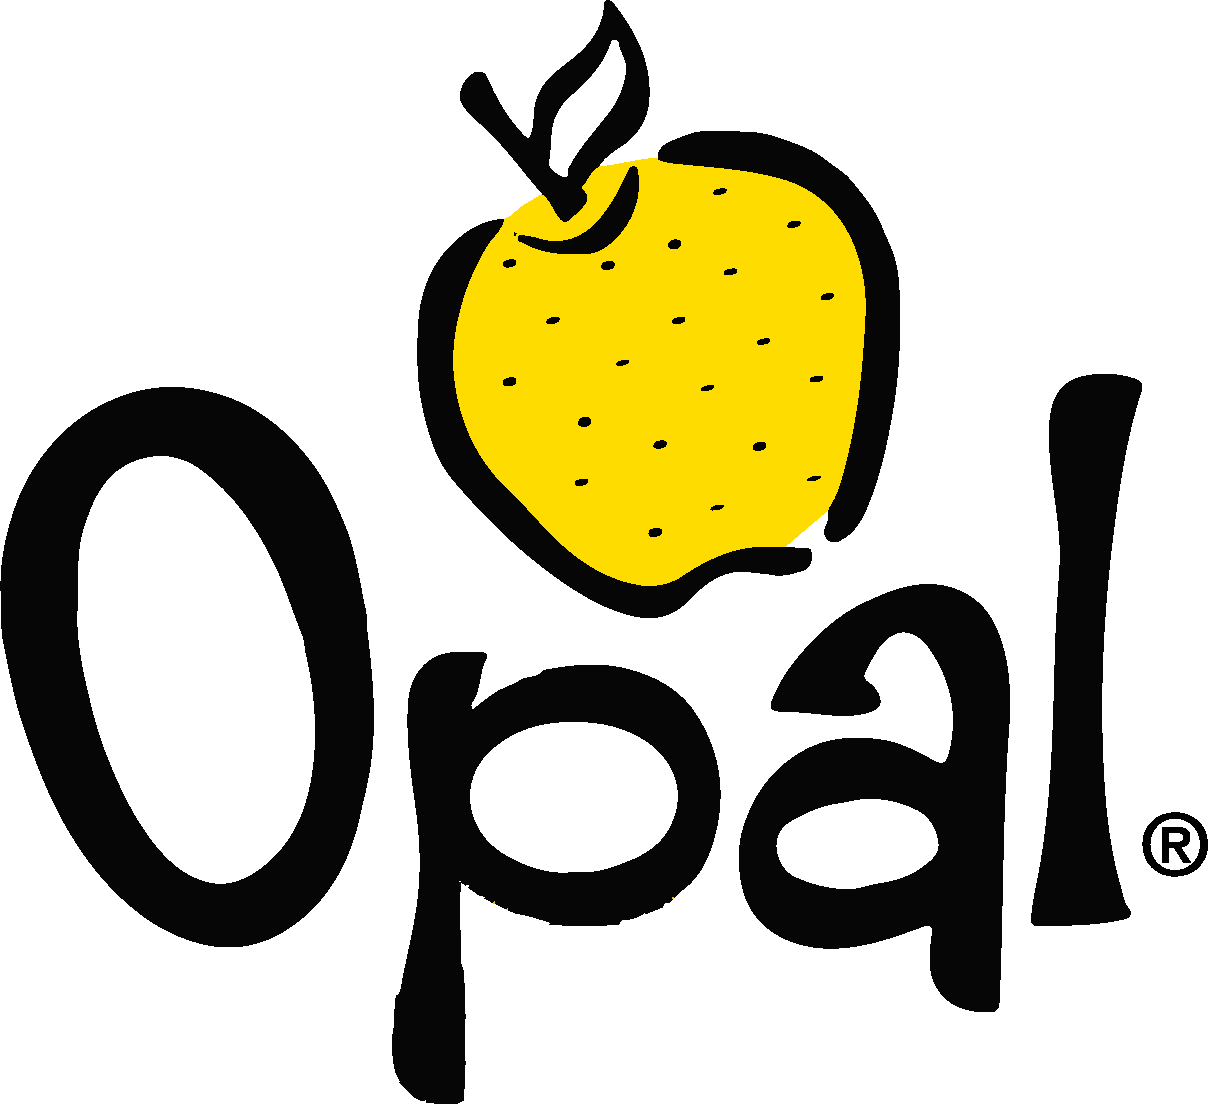 Opal apples: rethink your apple flavor - Lunds & Byerlys